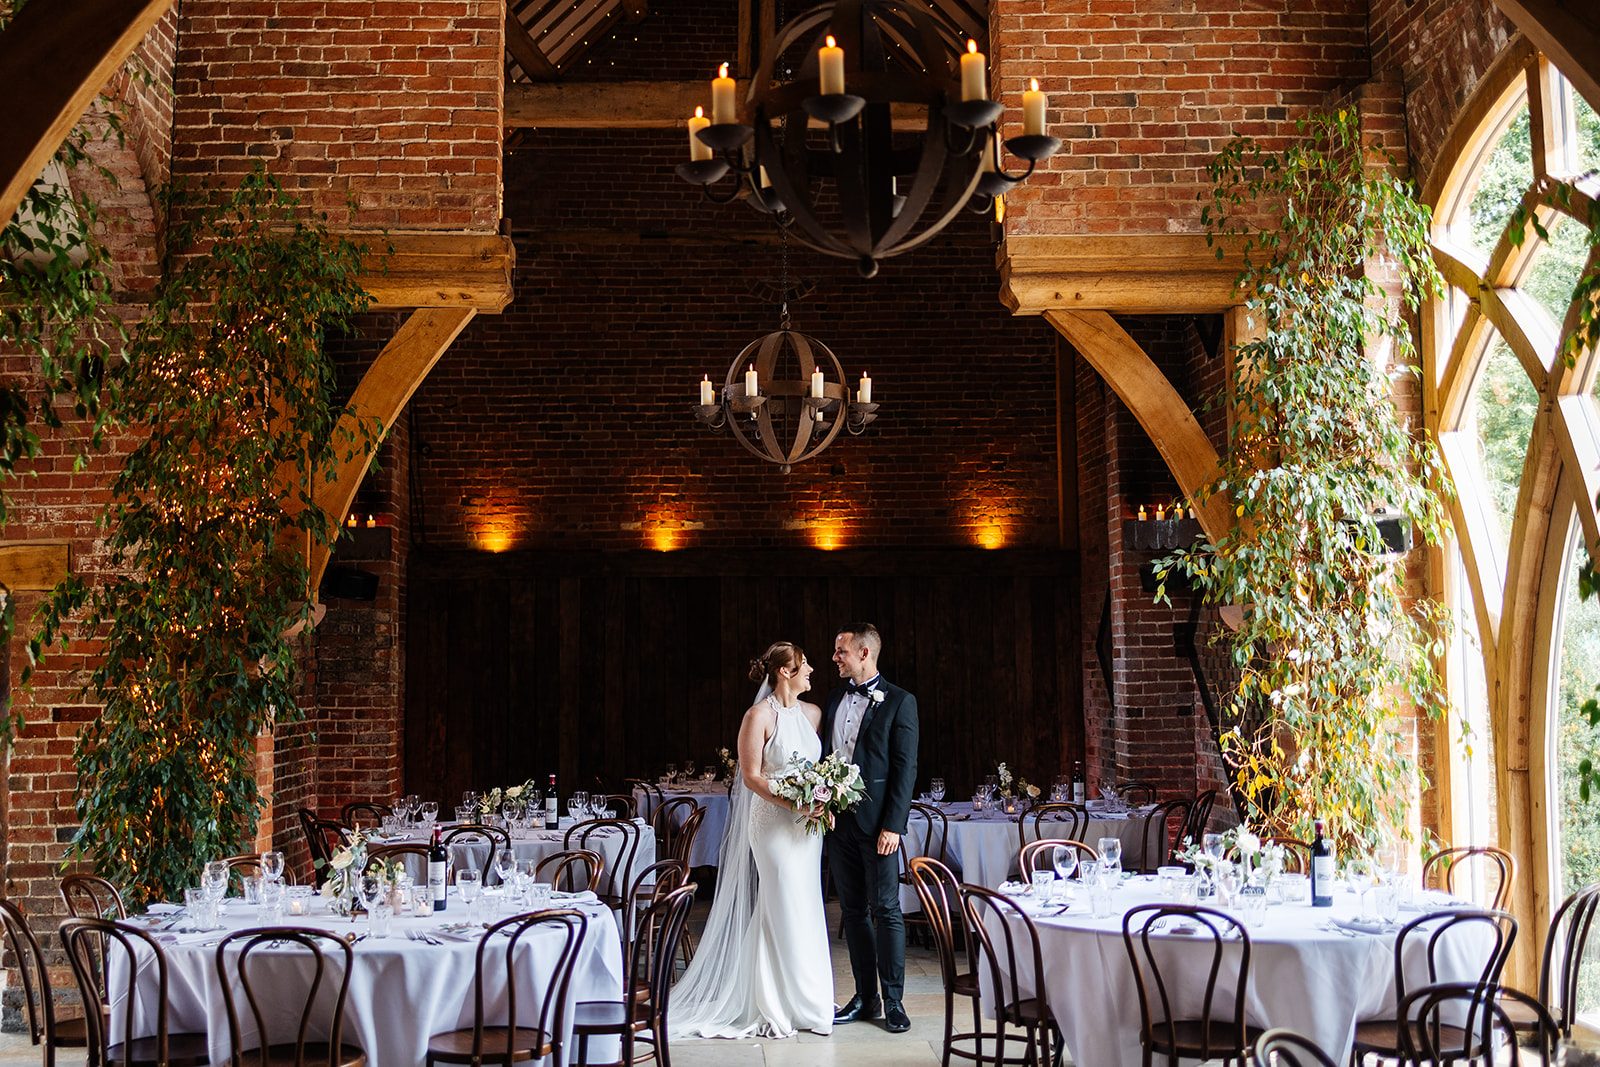 Couple in space set up for wedding breakfast. The inside has exposed brickwork, tall foliage and light pouring in from a tall window 